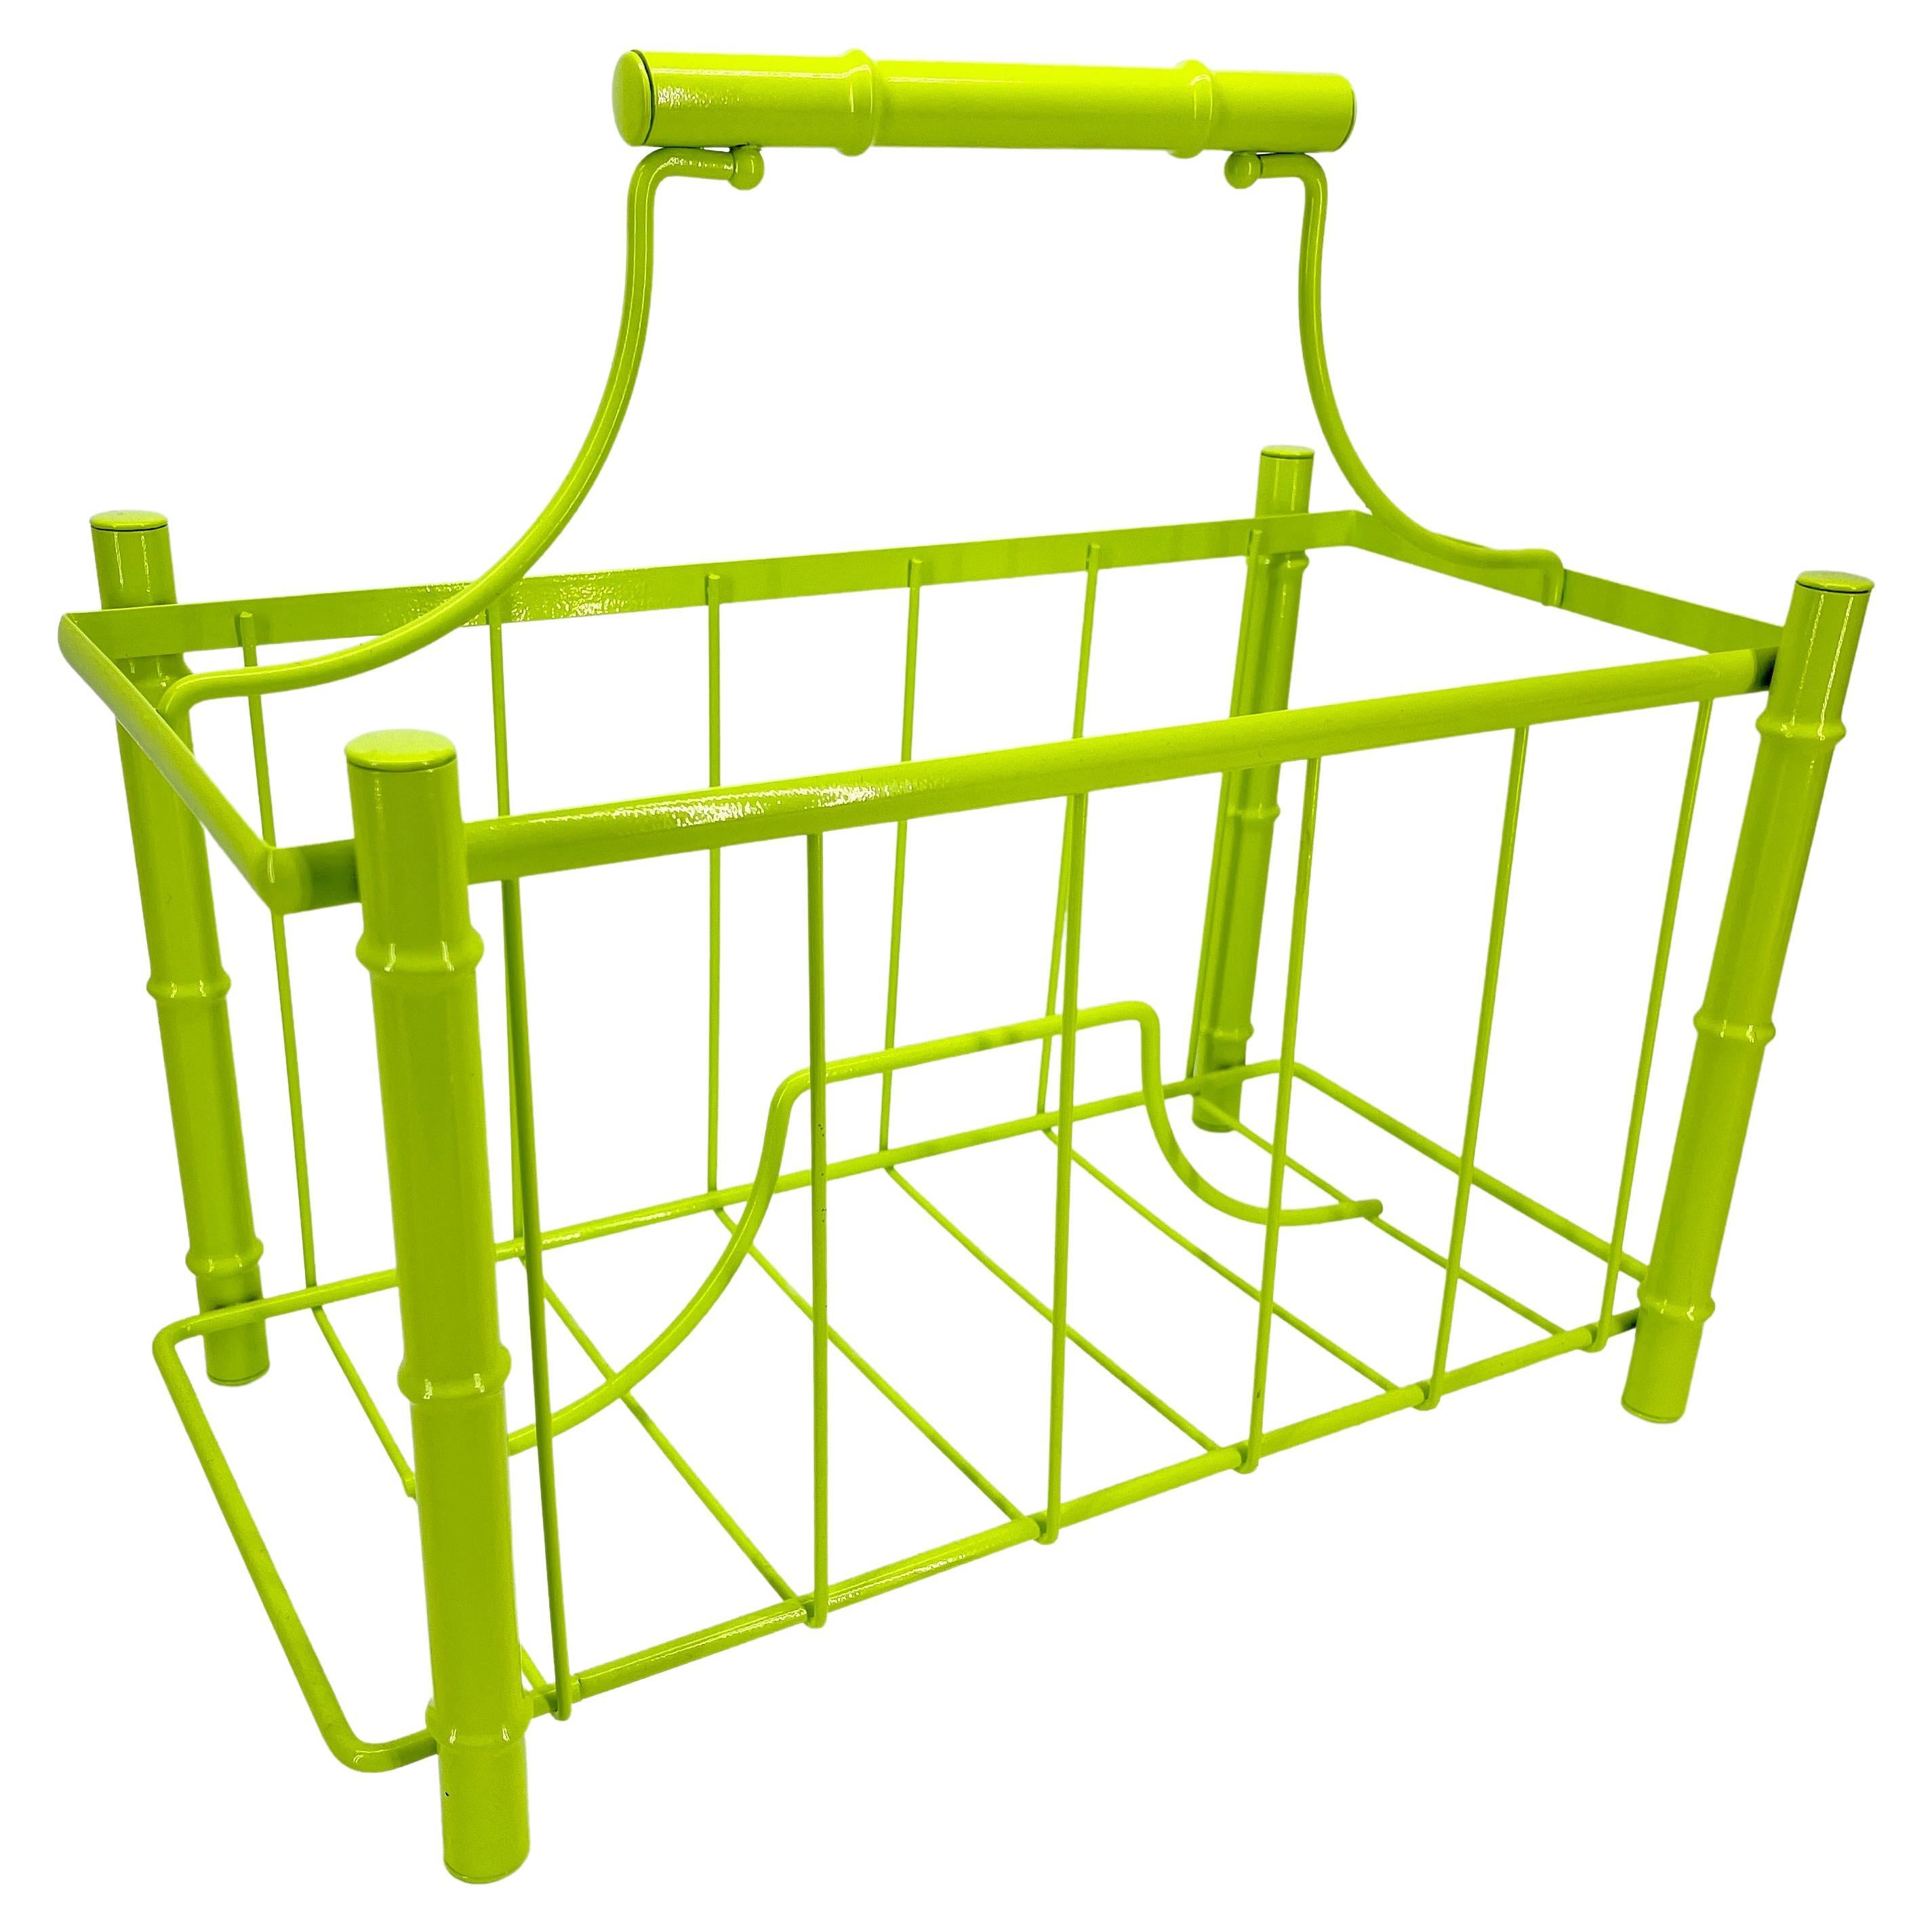 Mid-Century Modern Faux Bamboo Magazine Rack, Powder Coated Bright Chartreuse